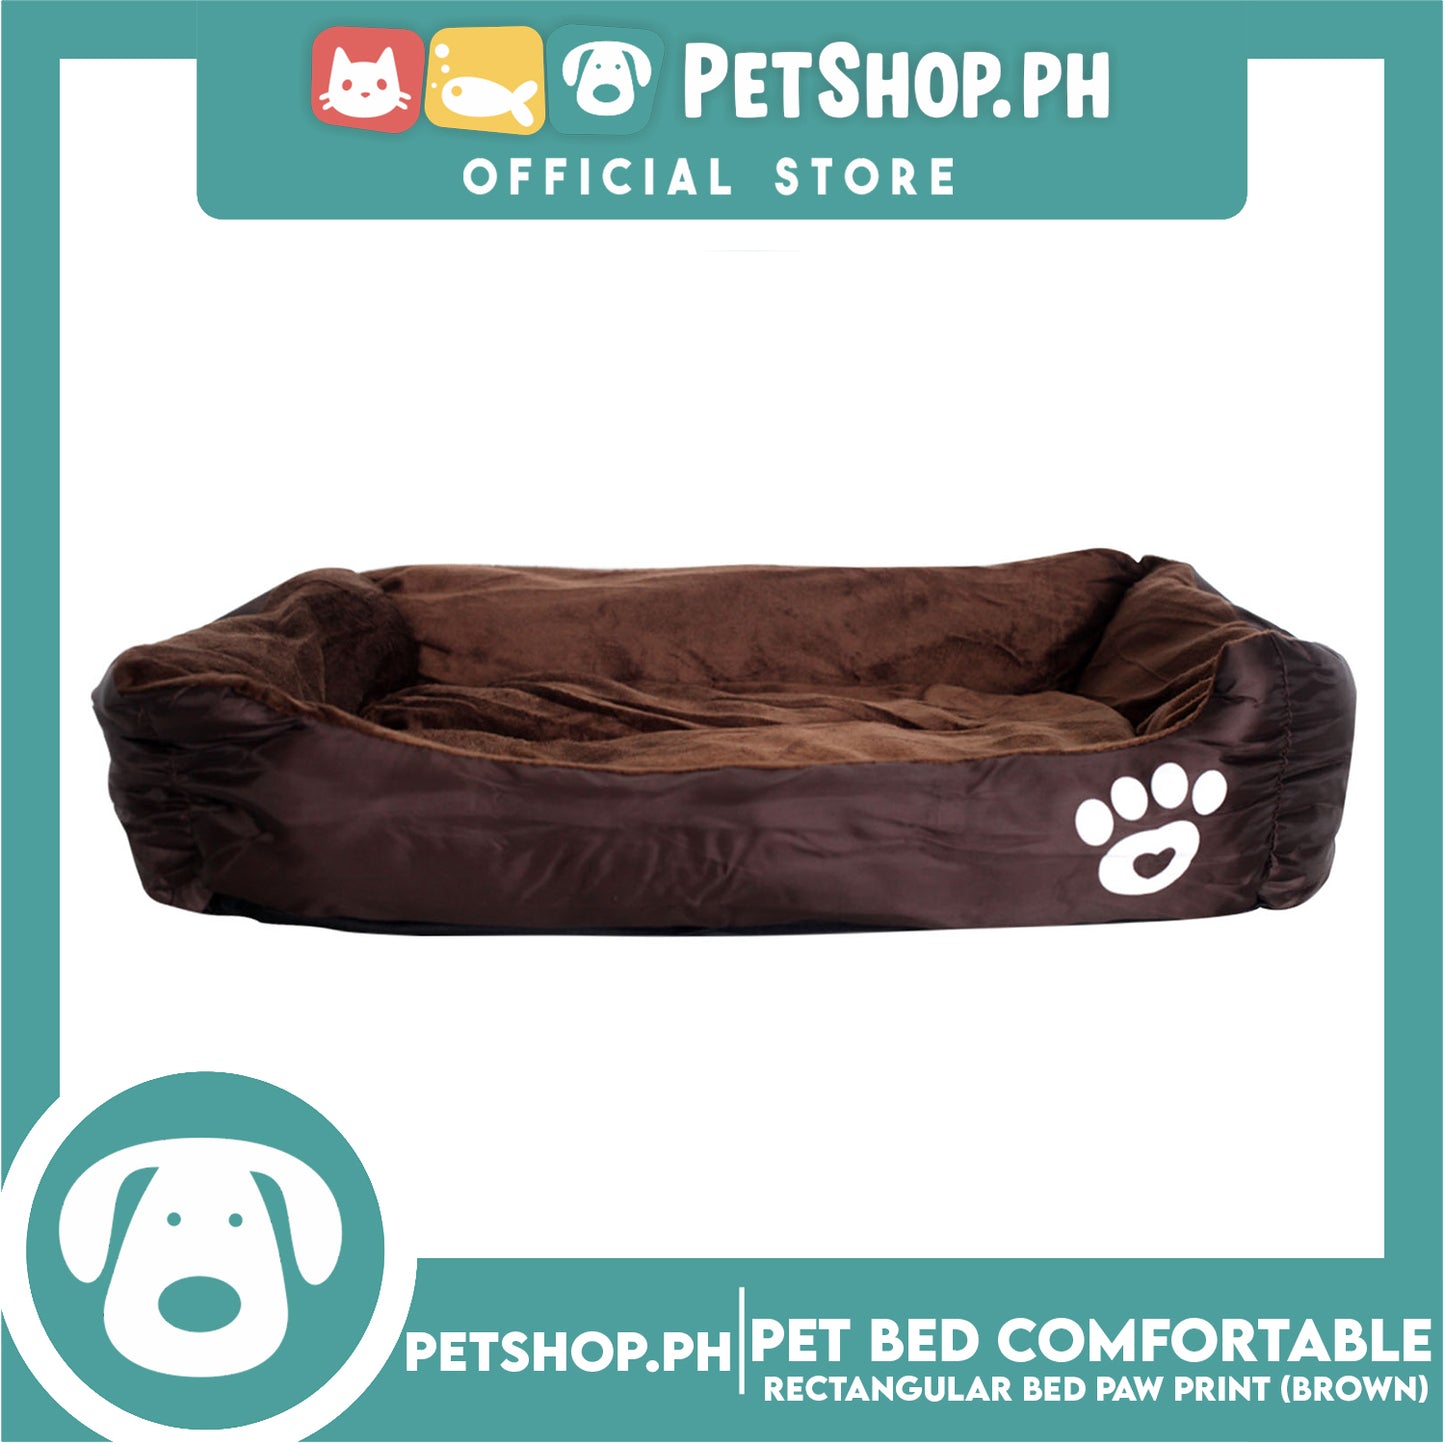 Pet Bed Comfortable Rectangular Pet Bed with Paw Print 50x40x12cm Small for Dogs & Cats (Brown)